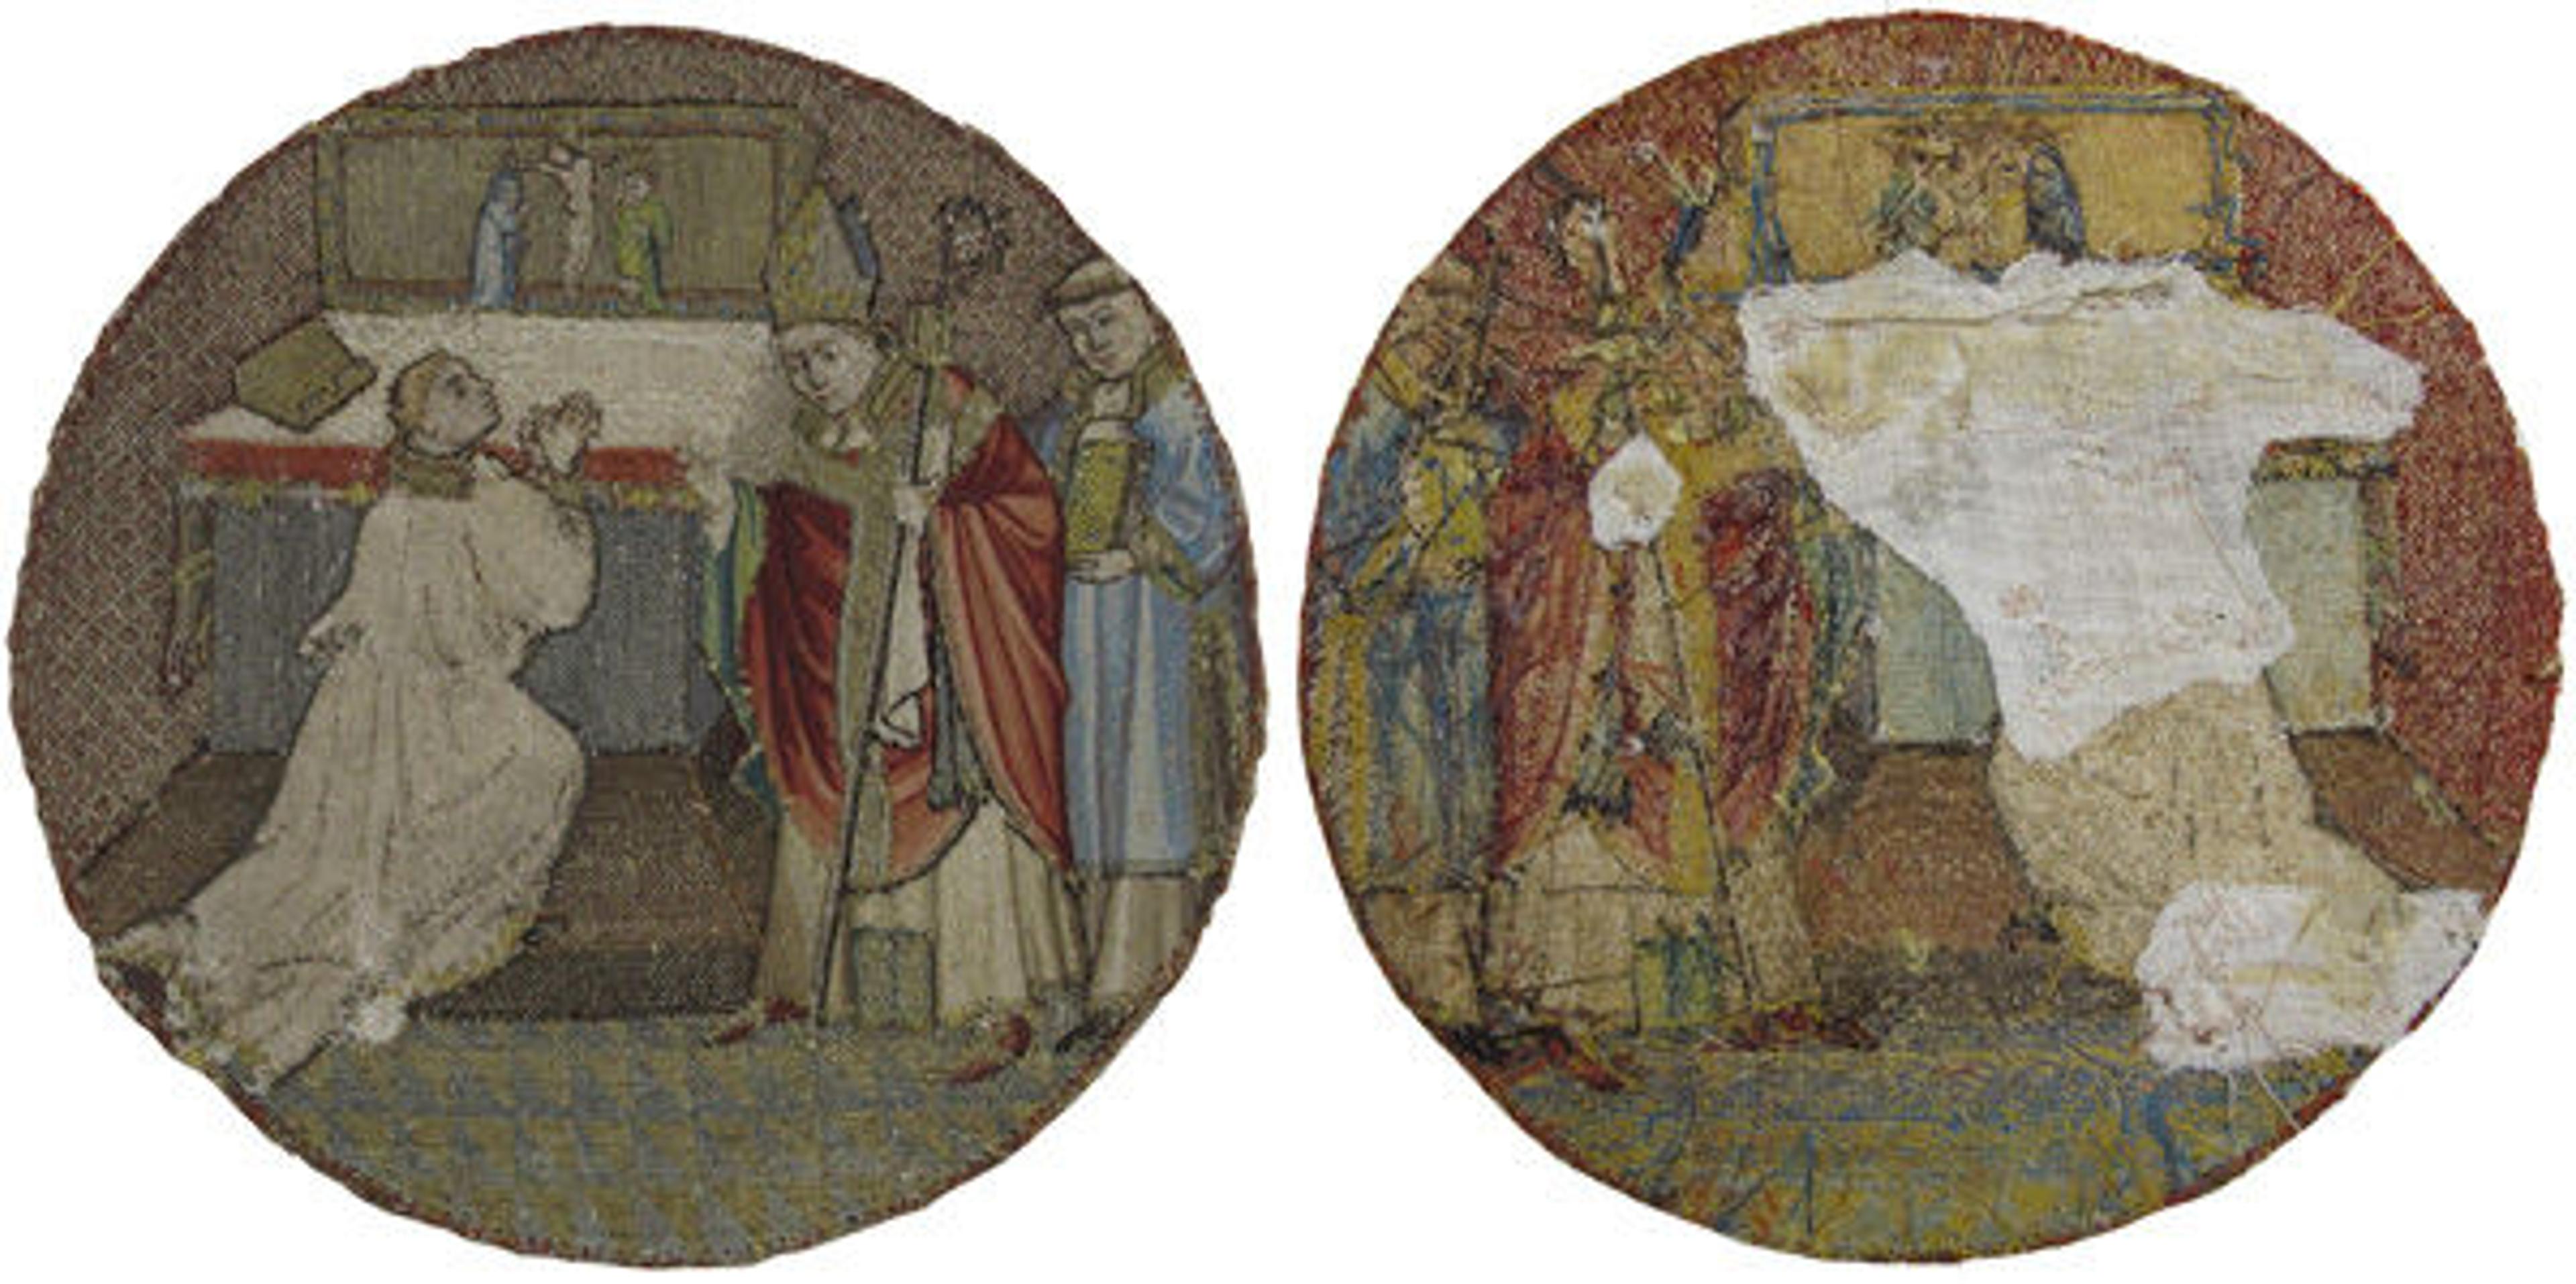 Fig. 1. Obverse (left) and reverse (right) of Saint Martin and Saint Hilary (1975.1.1908)